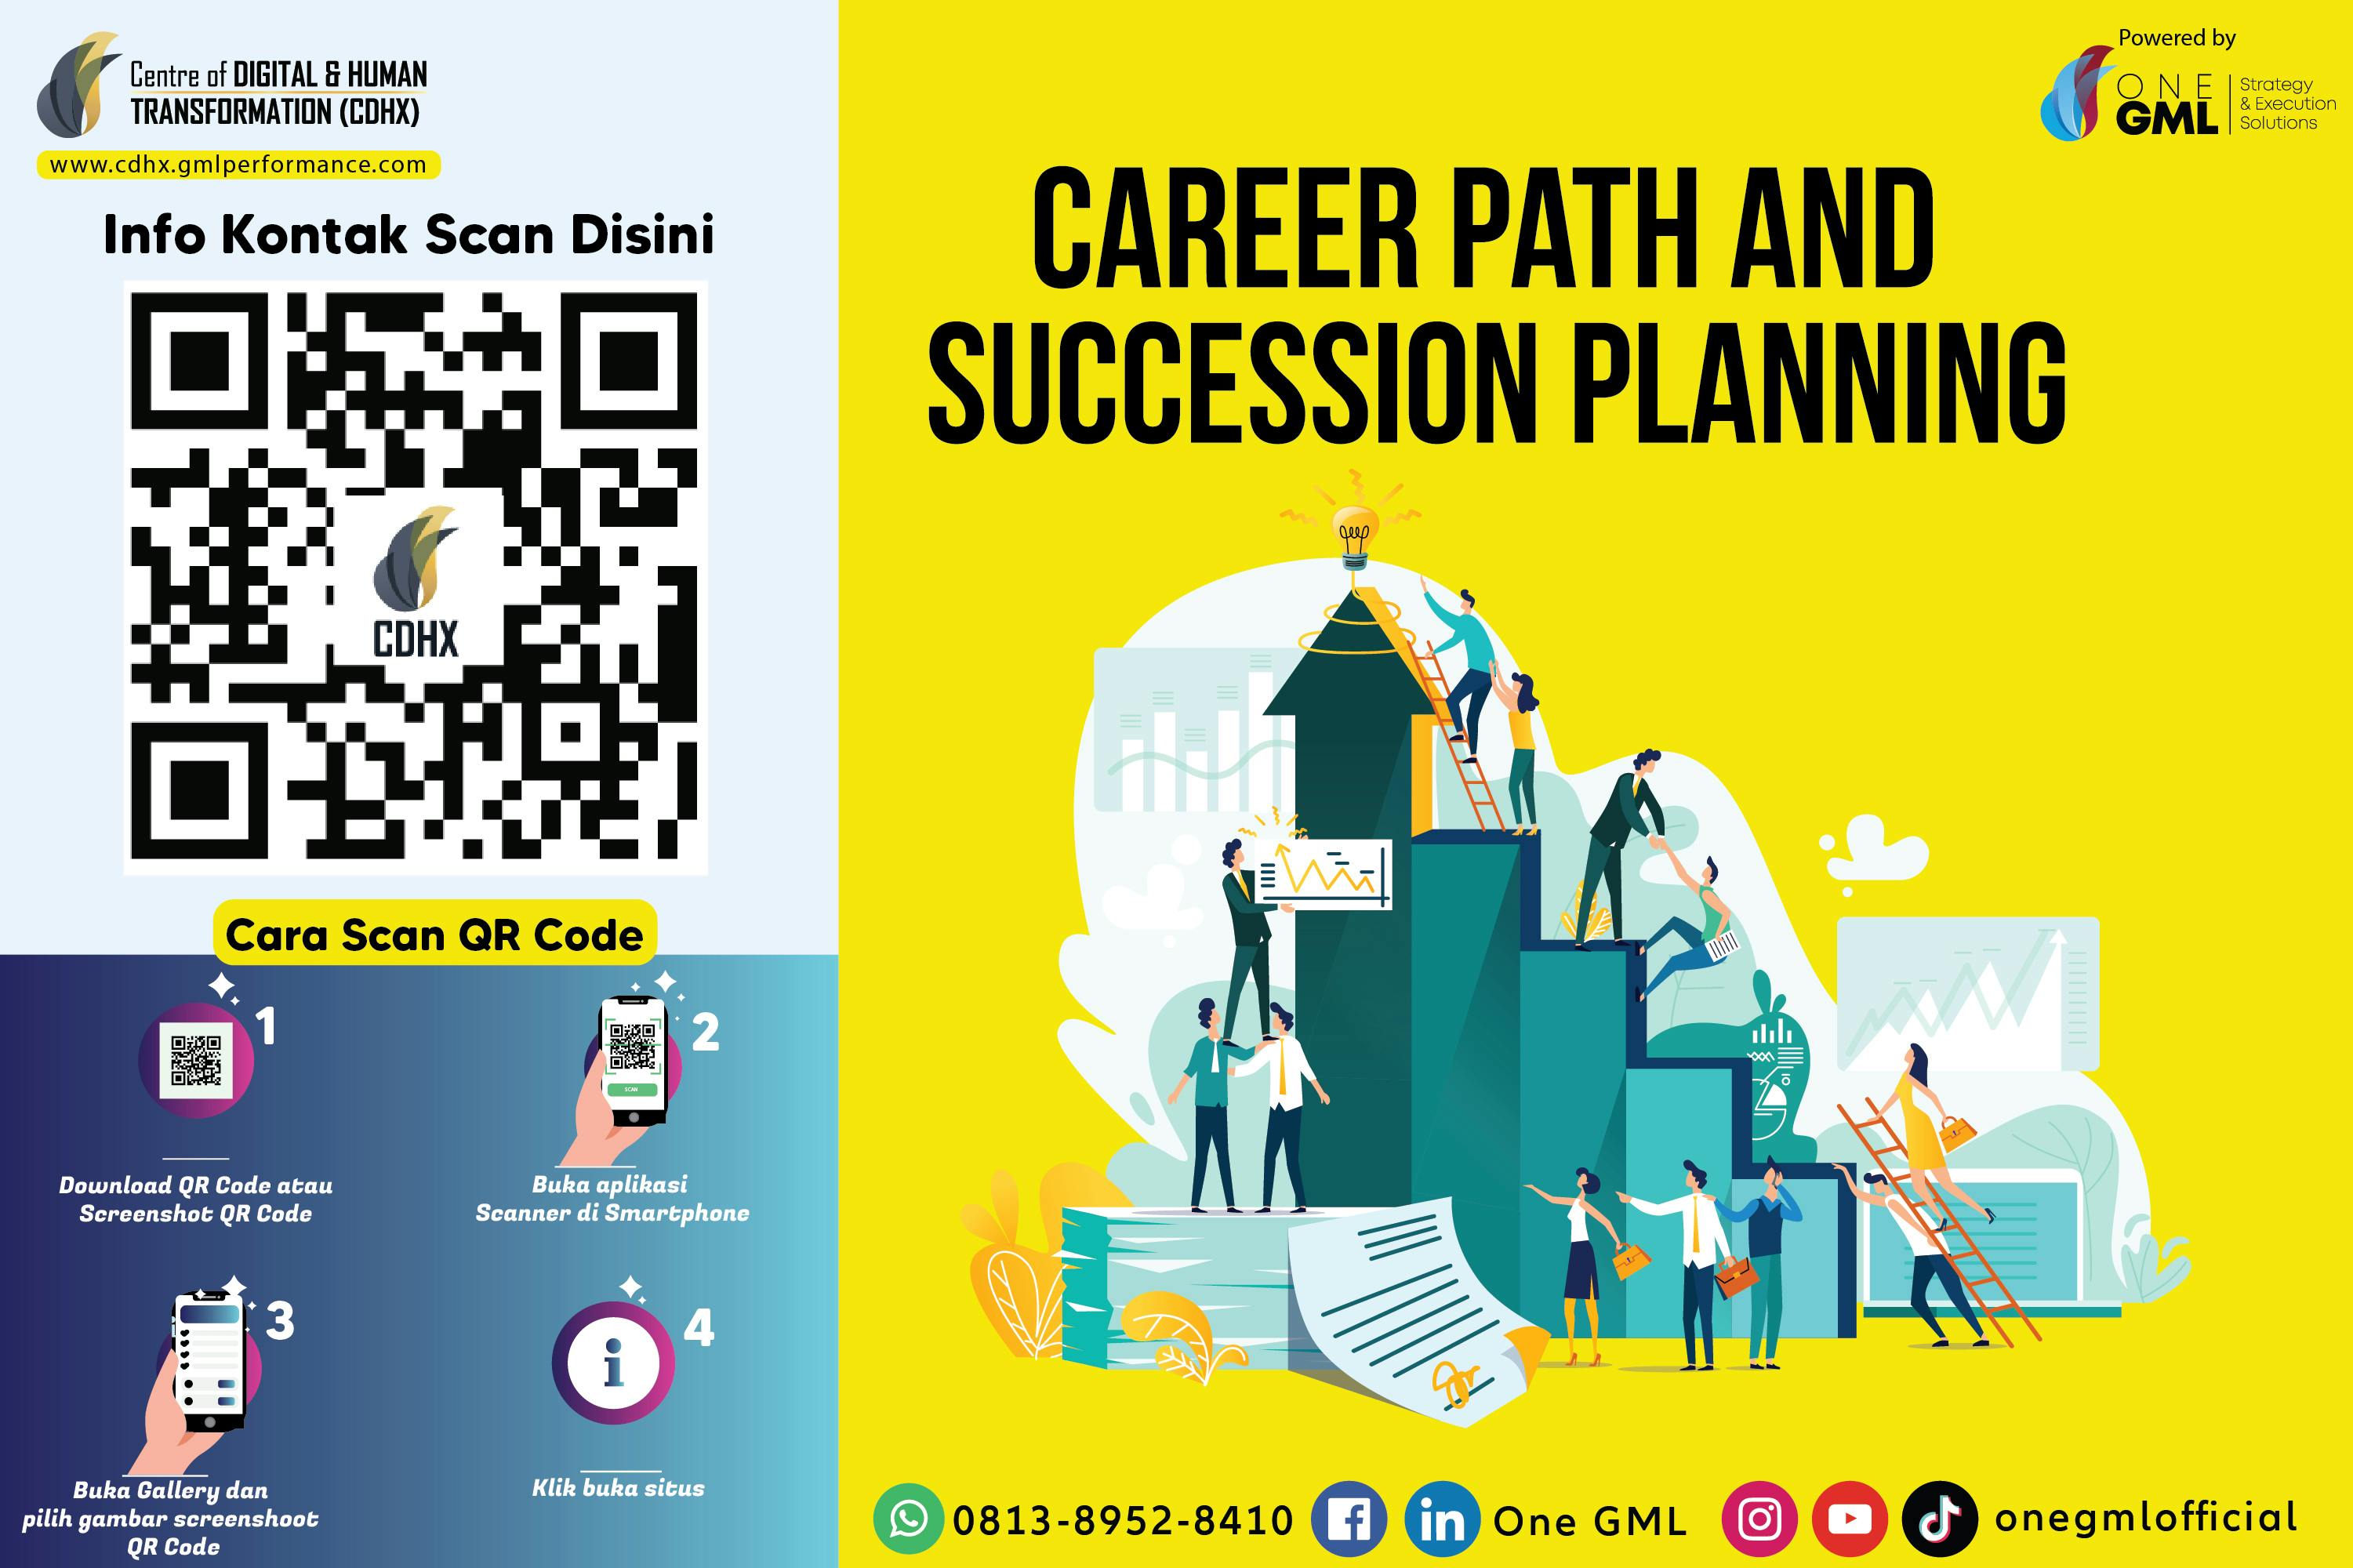 Career Path and Succession Planning